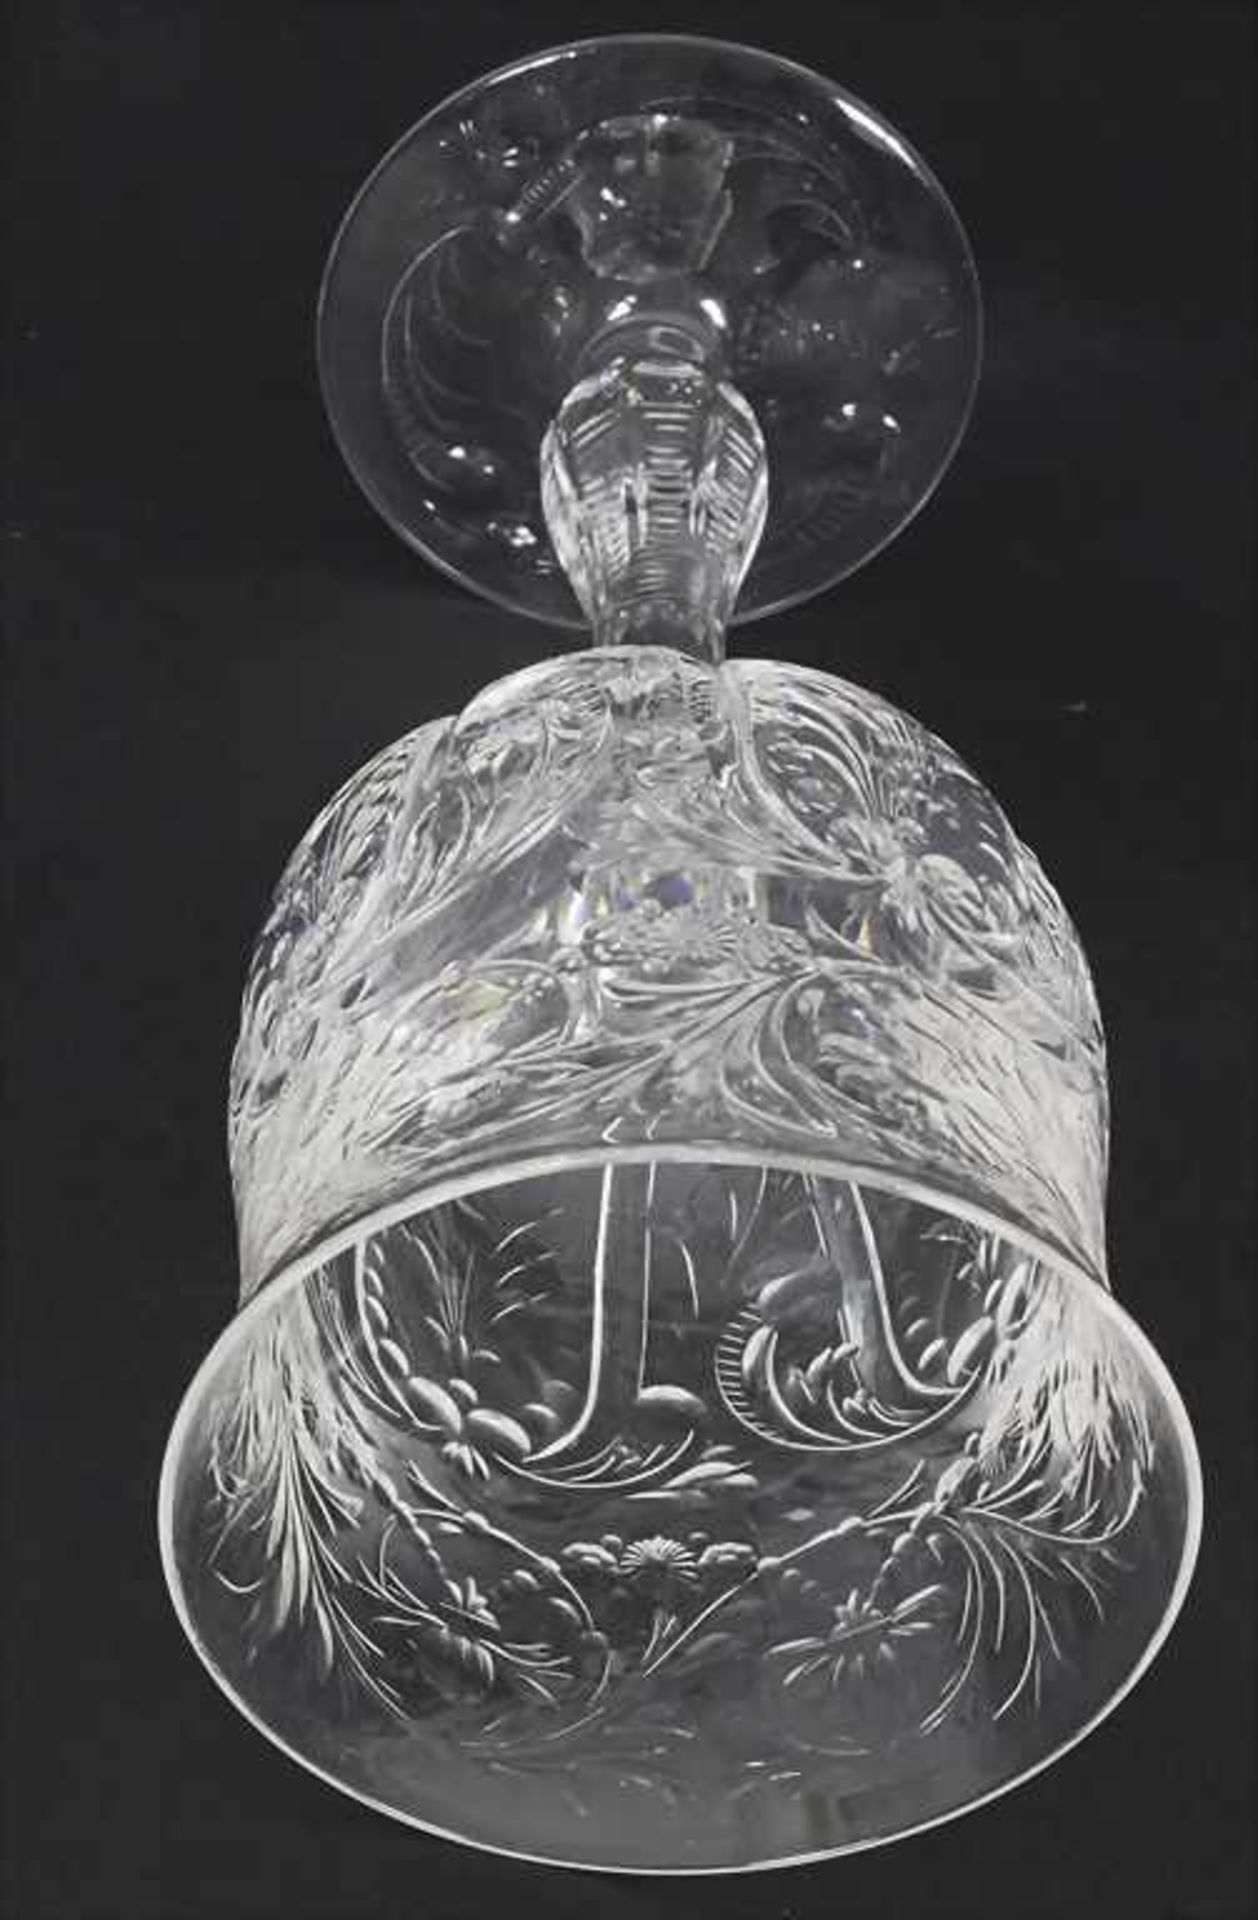 Weinglas / A wine glass, Frankreich, 19. Jh.Material: farbloses Glas, geschliffen,Höhe: 20,5 cm, - Image 2 of 6